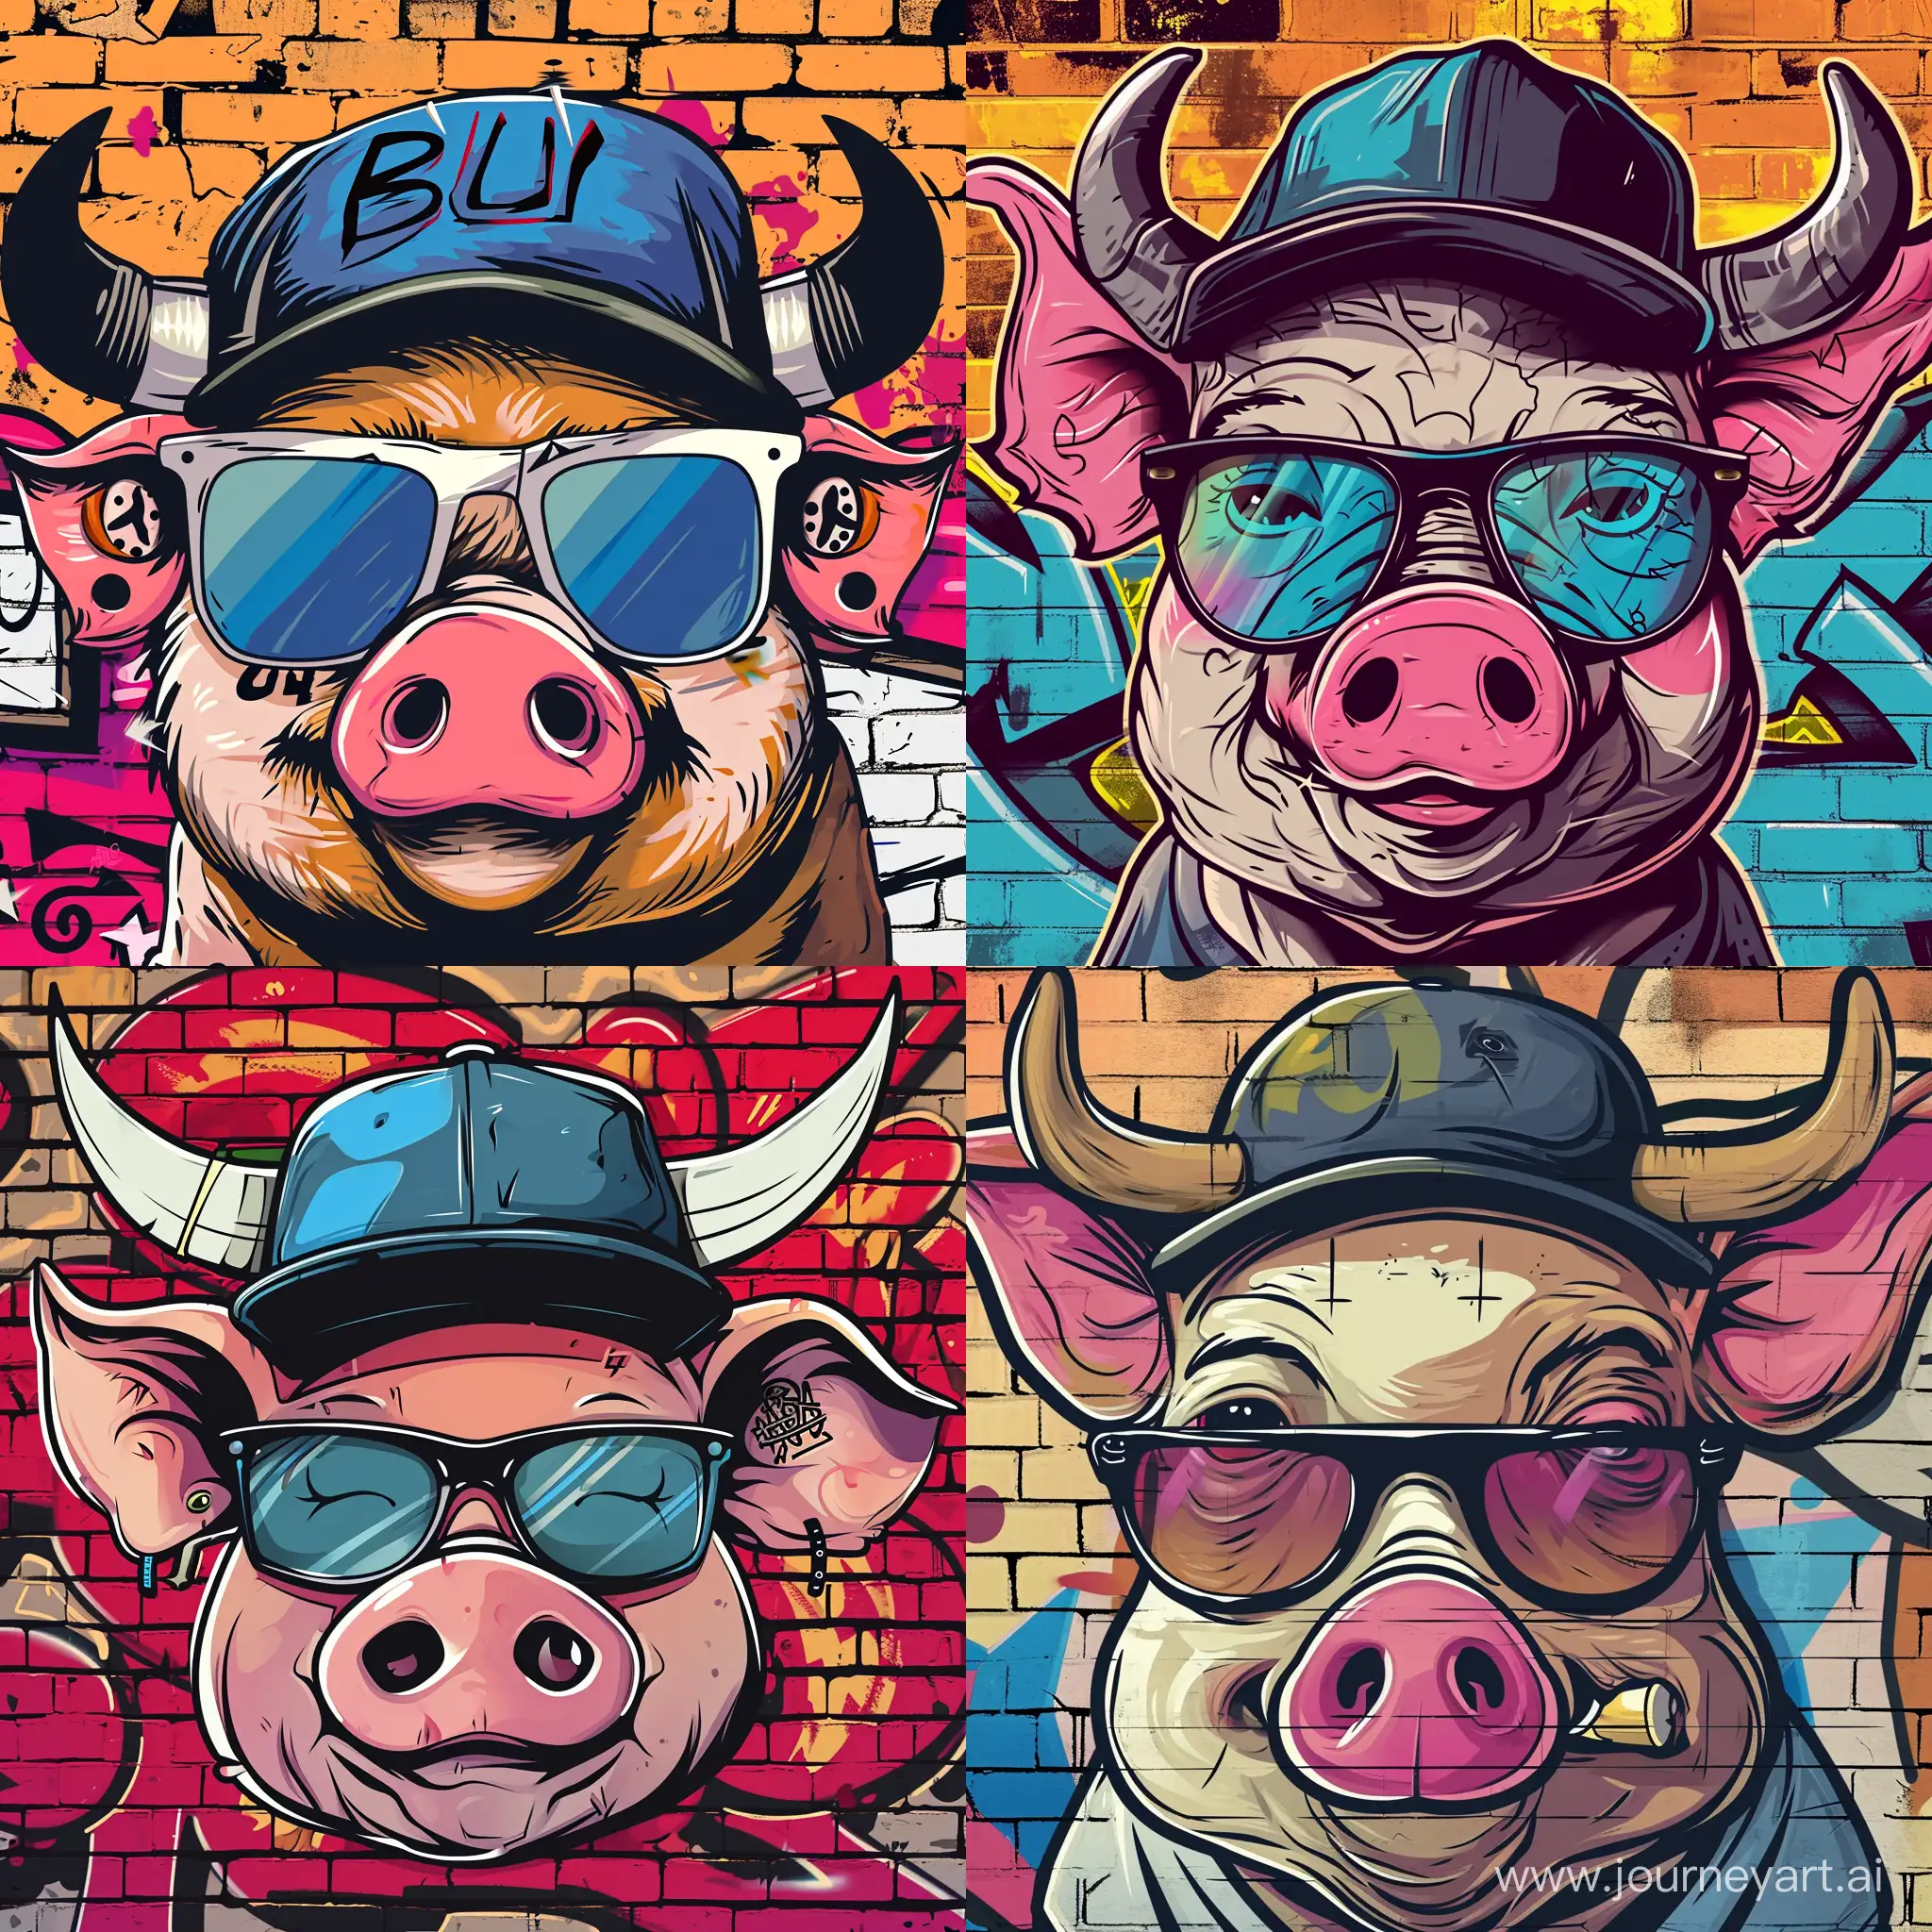 Cartoony Face of a pig wearing Sun Glasses, Wearing a Bull Cap, With a Black Ear Tunnels. Graffiti Background